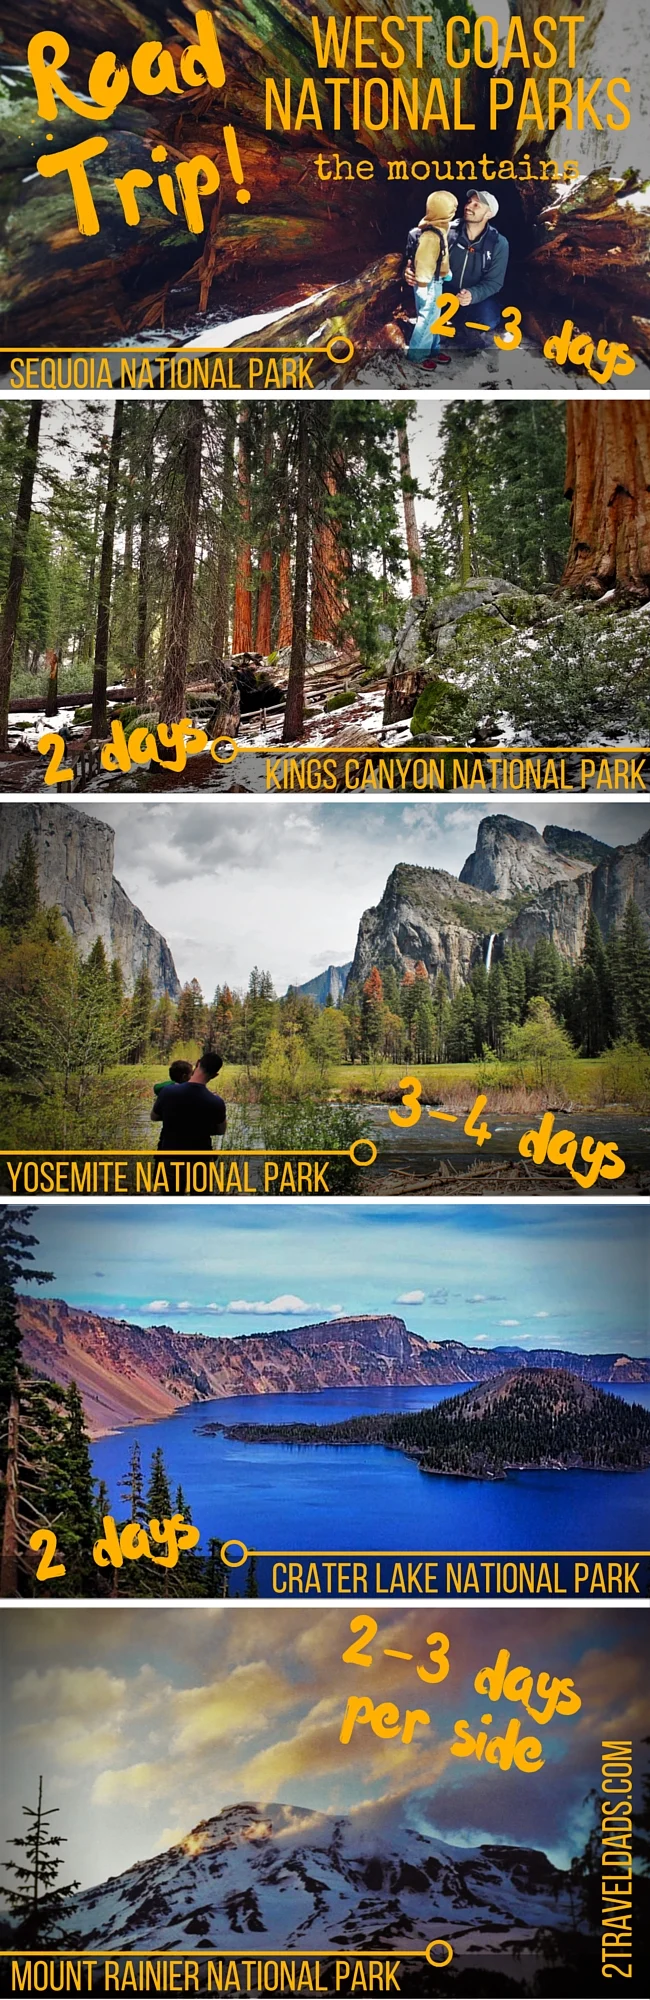 Ideal plan for a West Coast National Park road trip, visiting the various mountain National Parks! 2traveldads.com